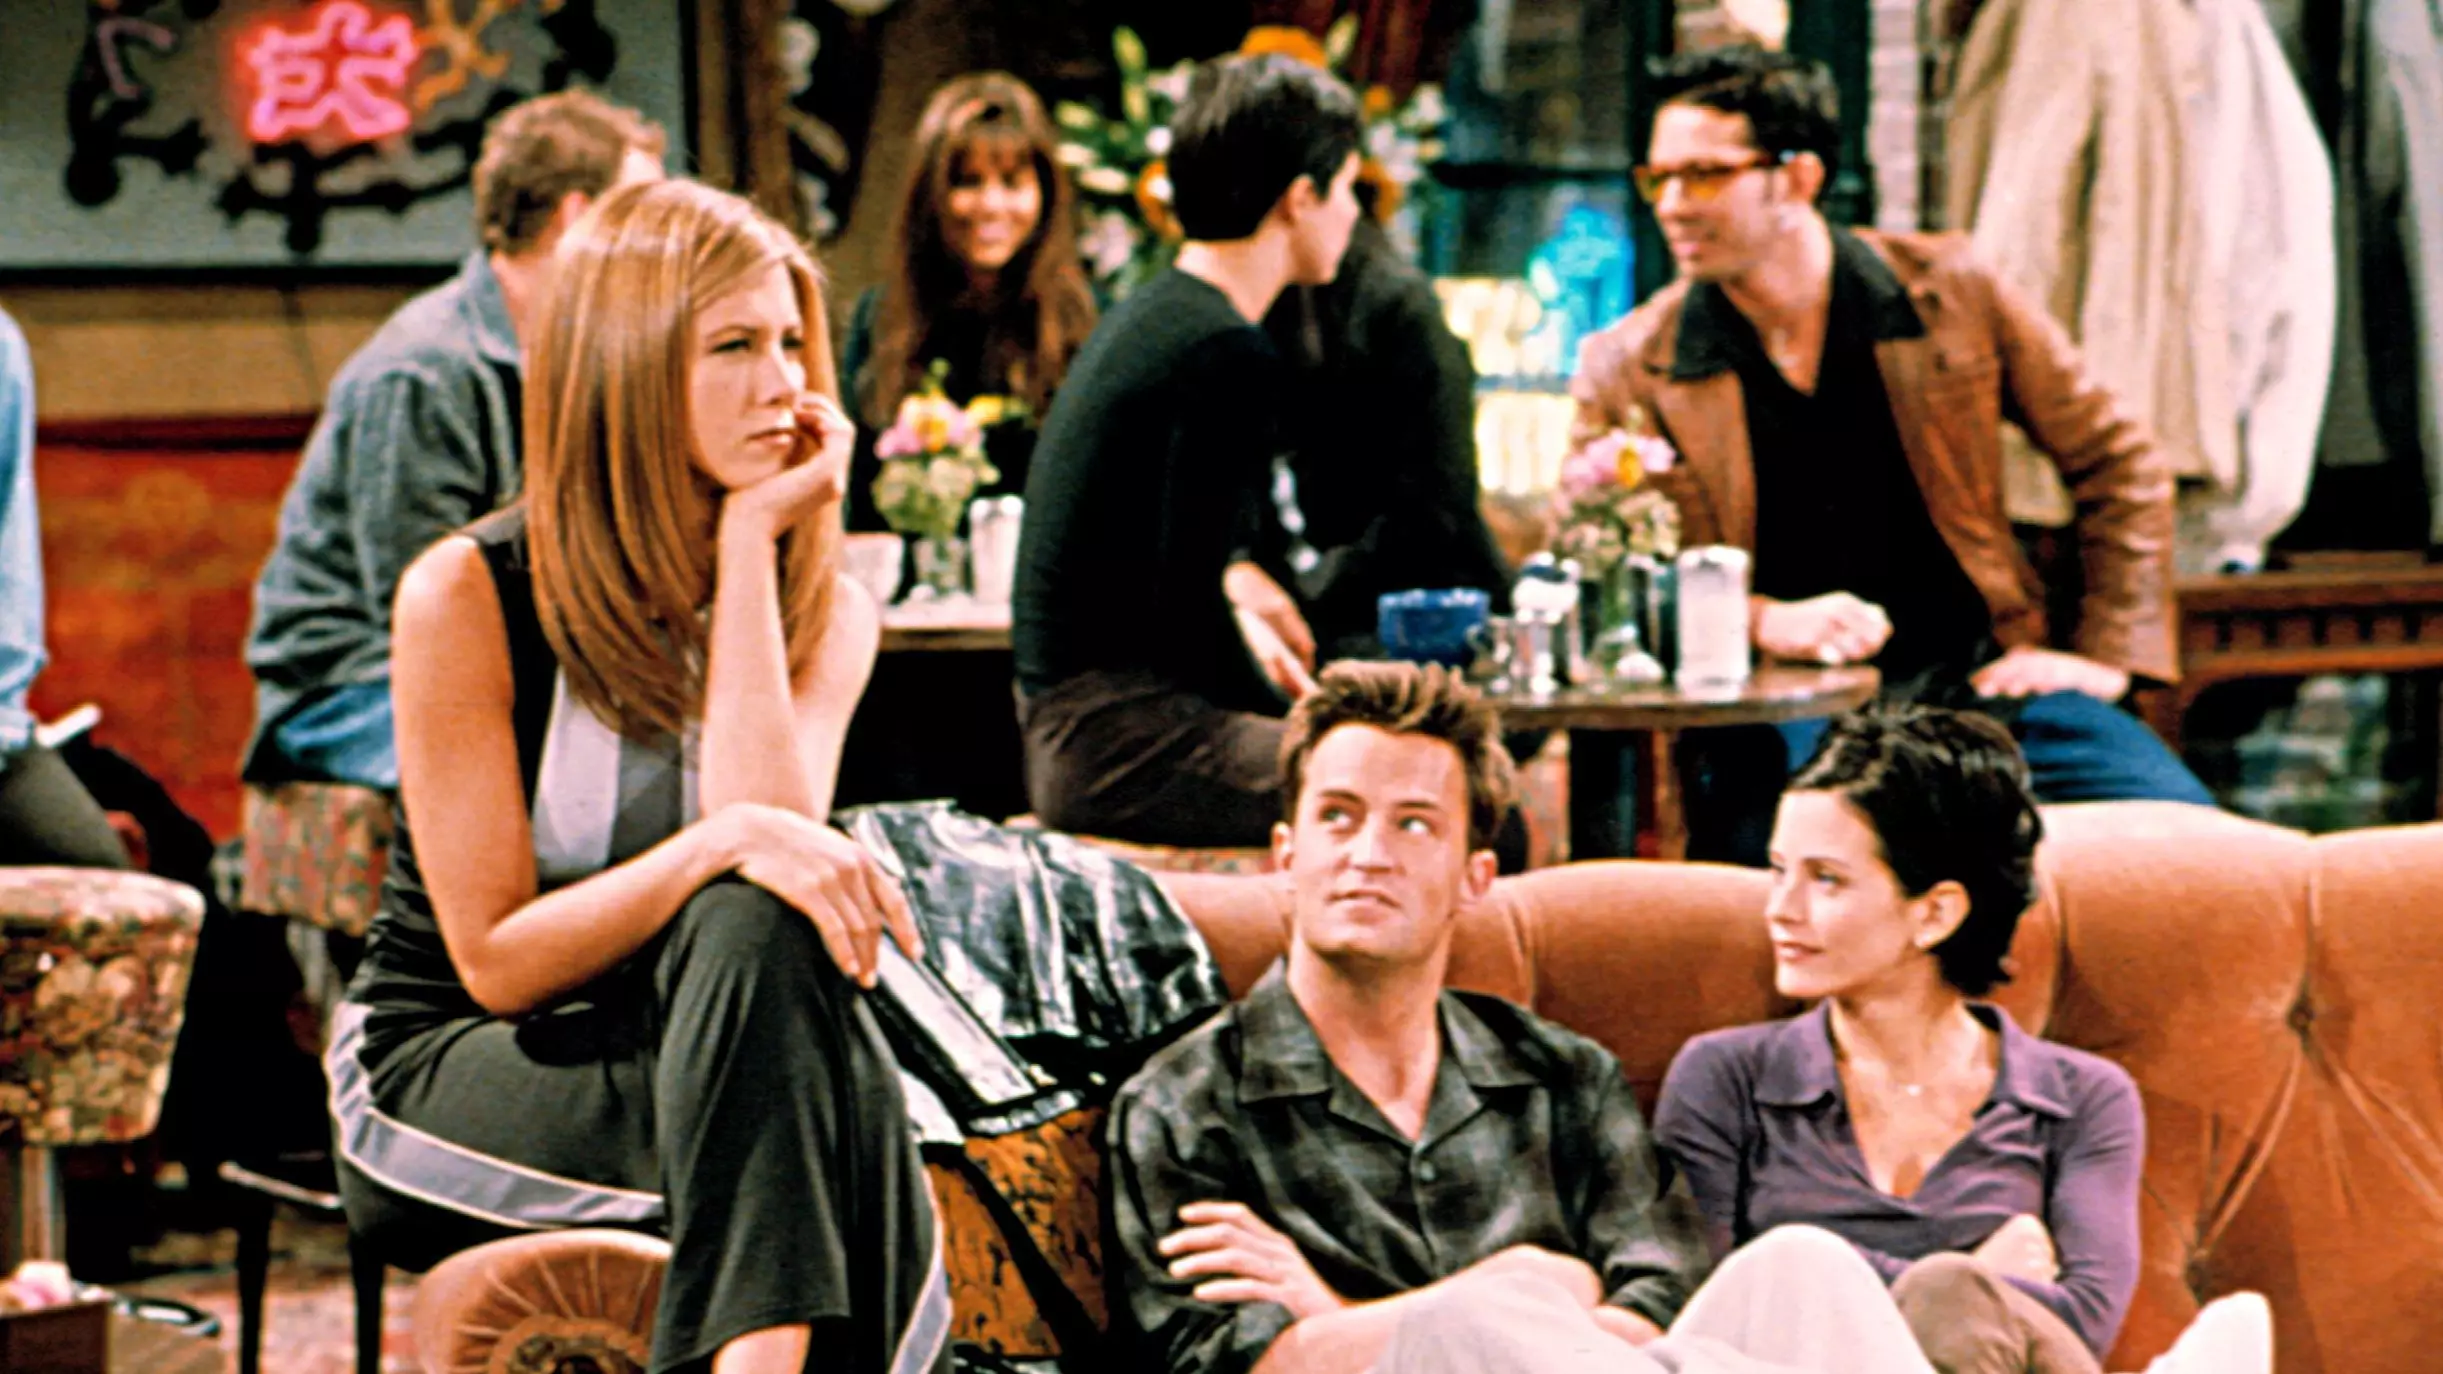 A 'Friends' Cafe In London Exists - And It Serves Prosecco